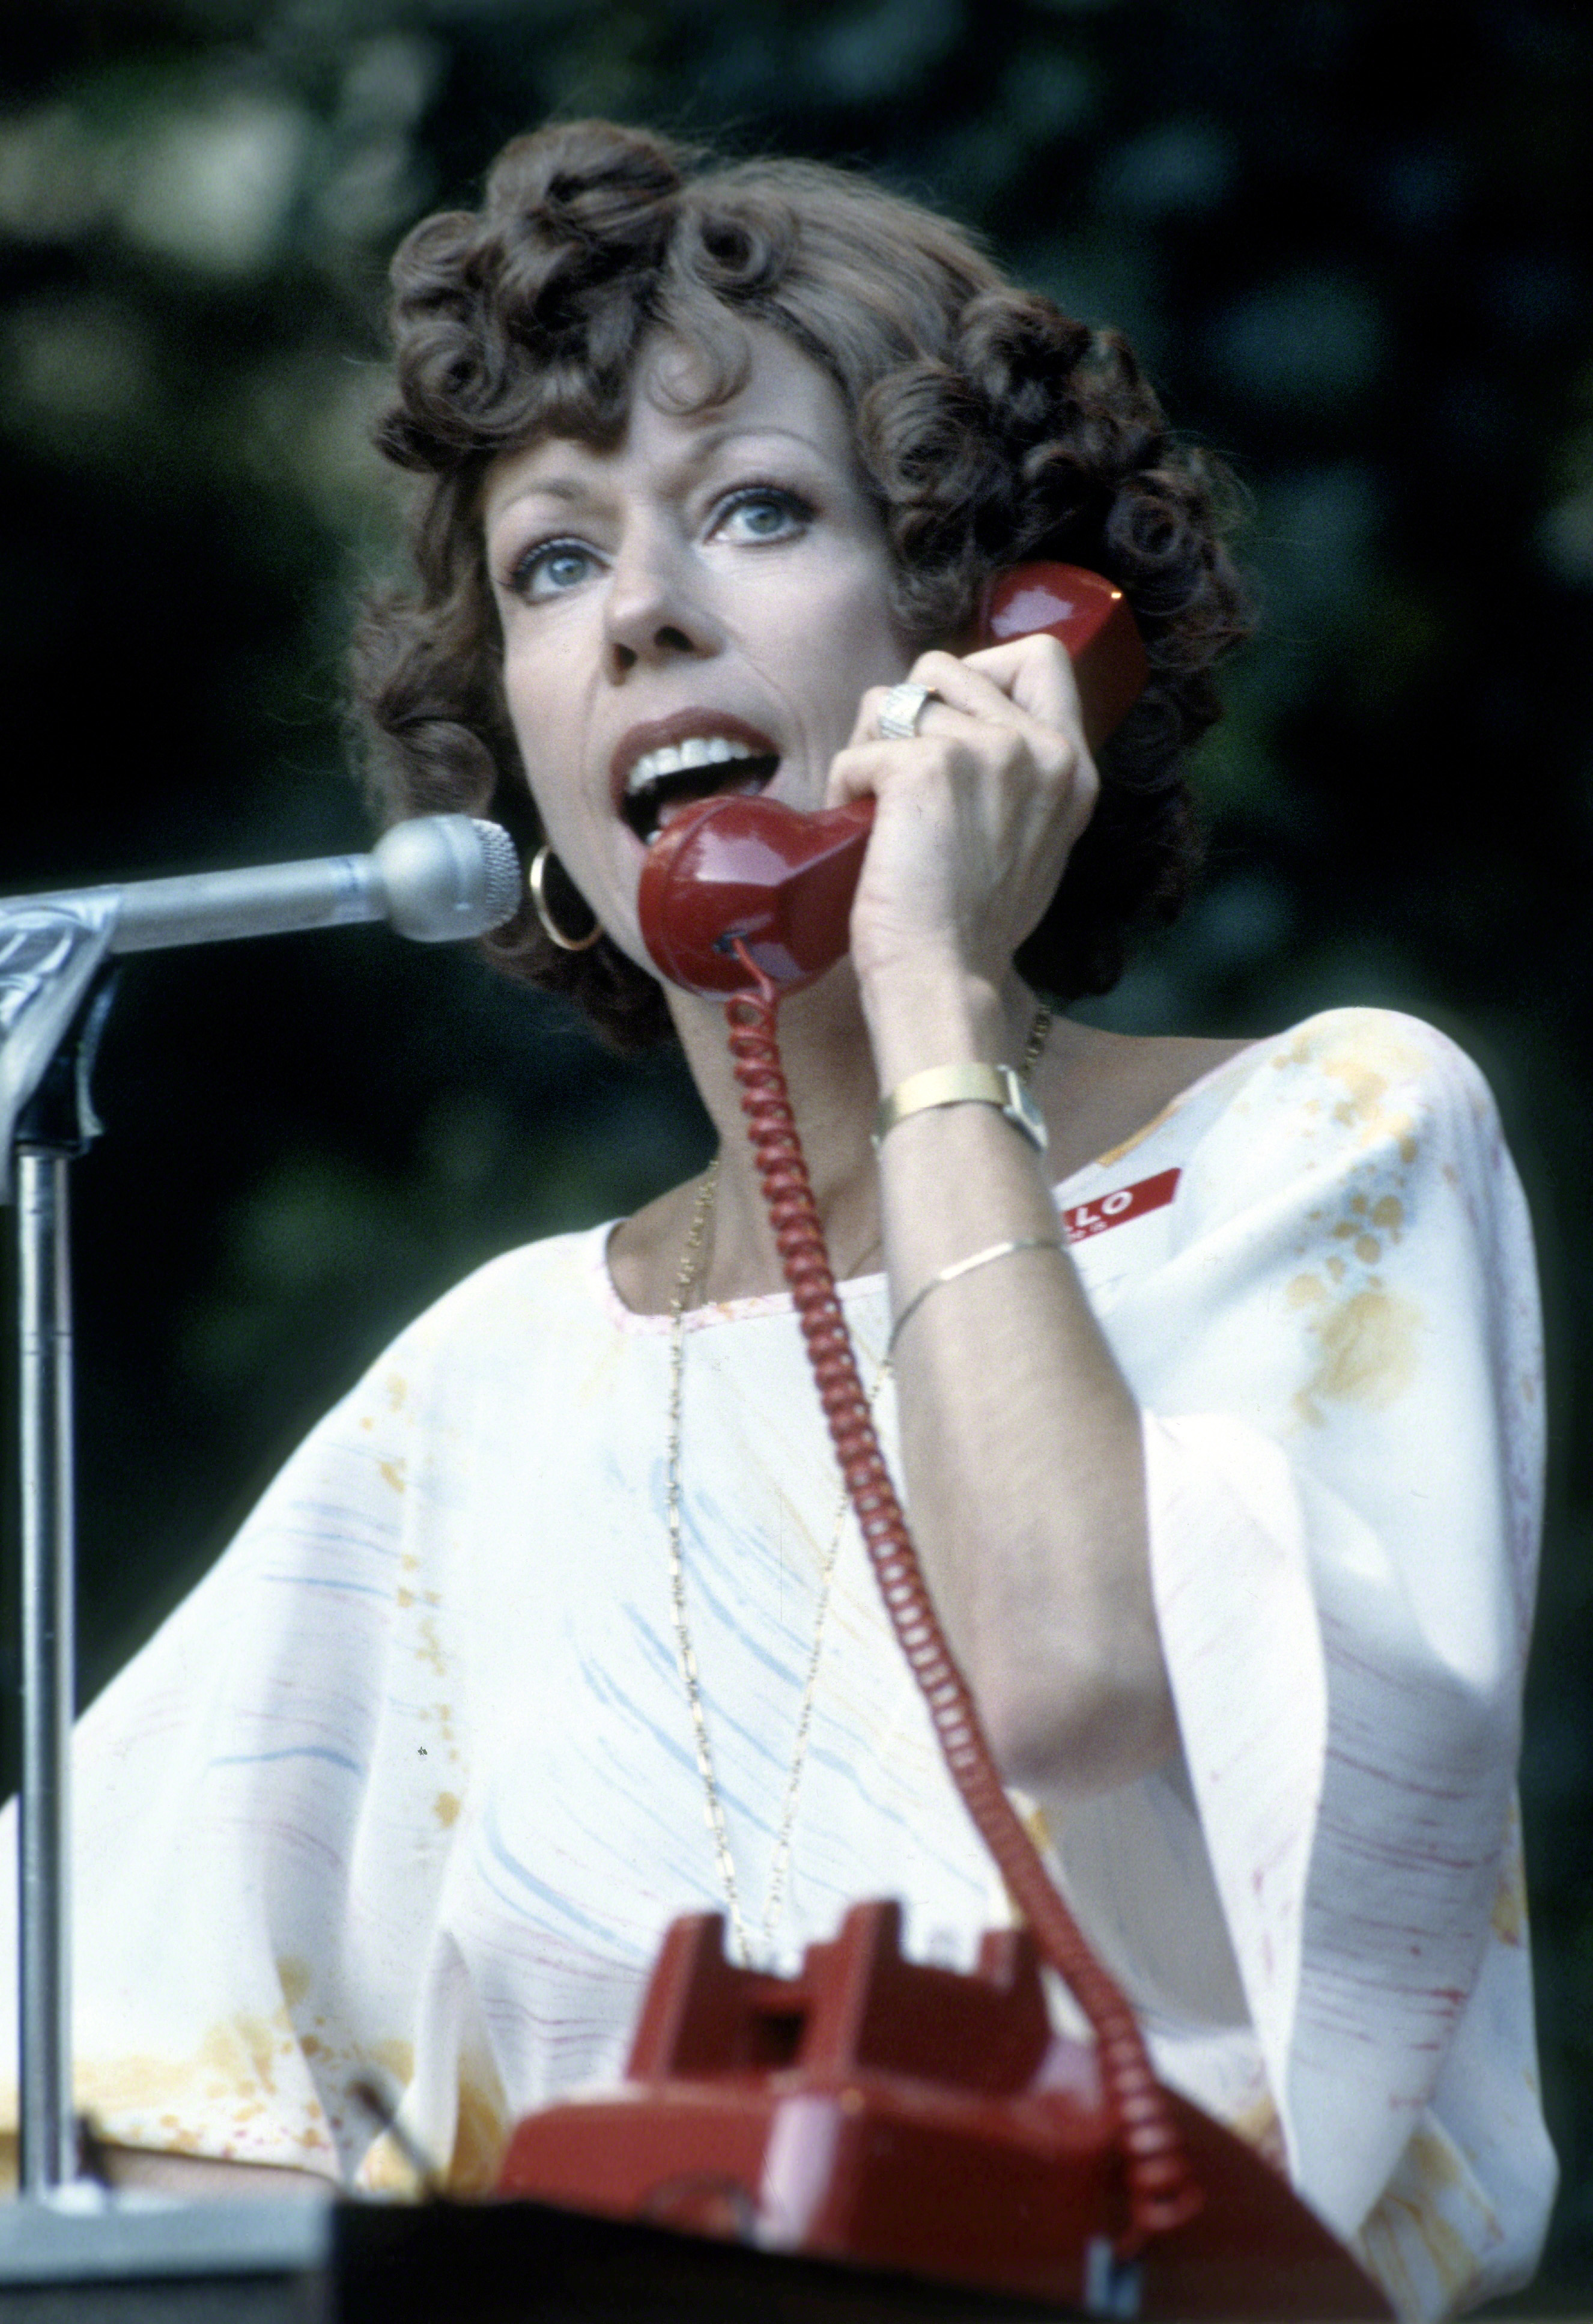 Carol Burnett performs at a charity fundraiser in 1979 | Source: Getty Images